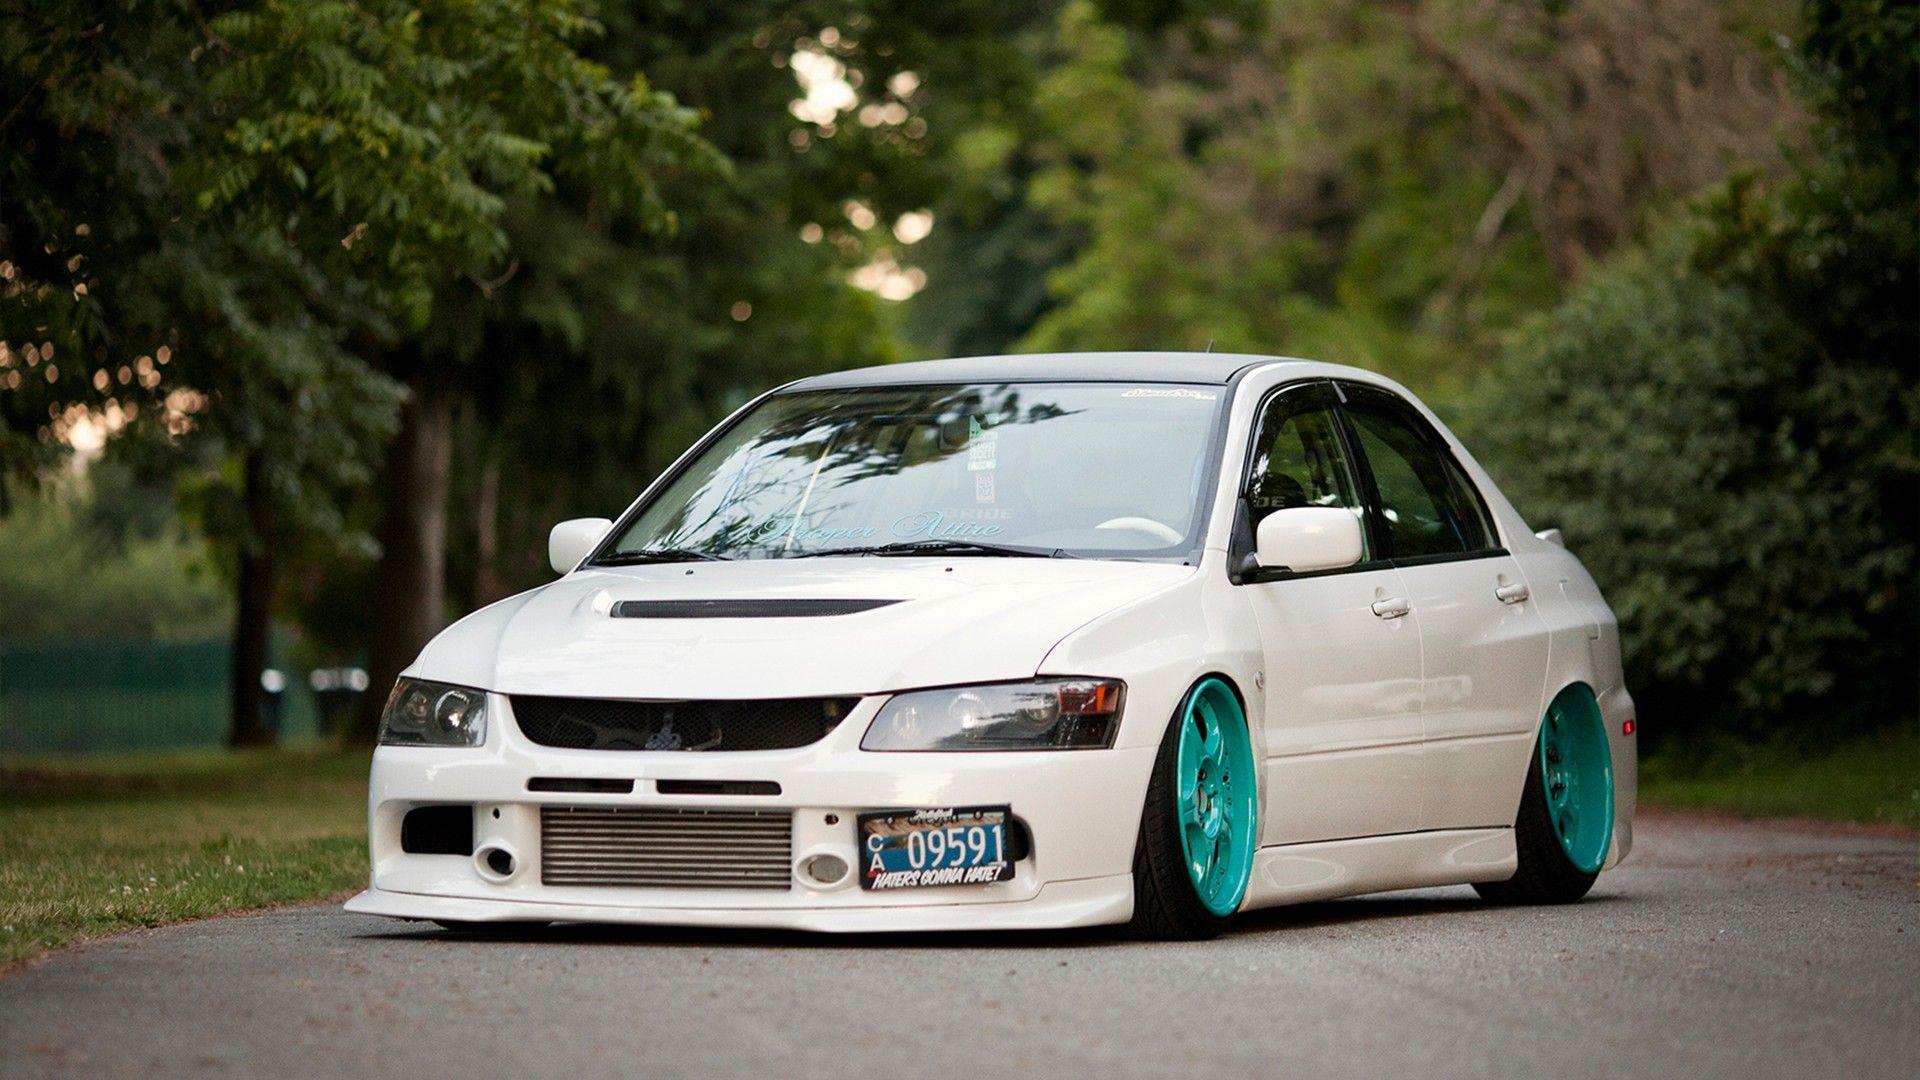 Jdm Stance Cars Wallpapers